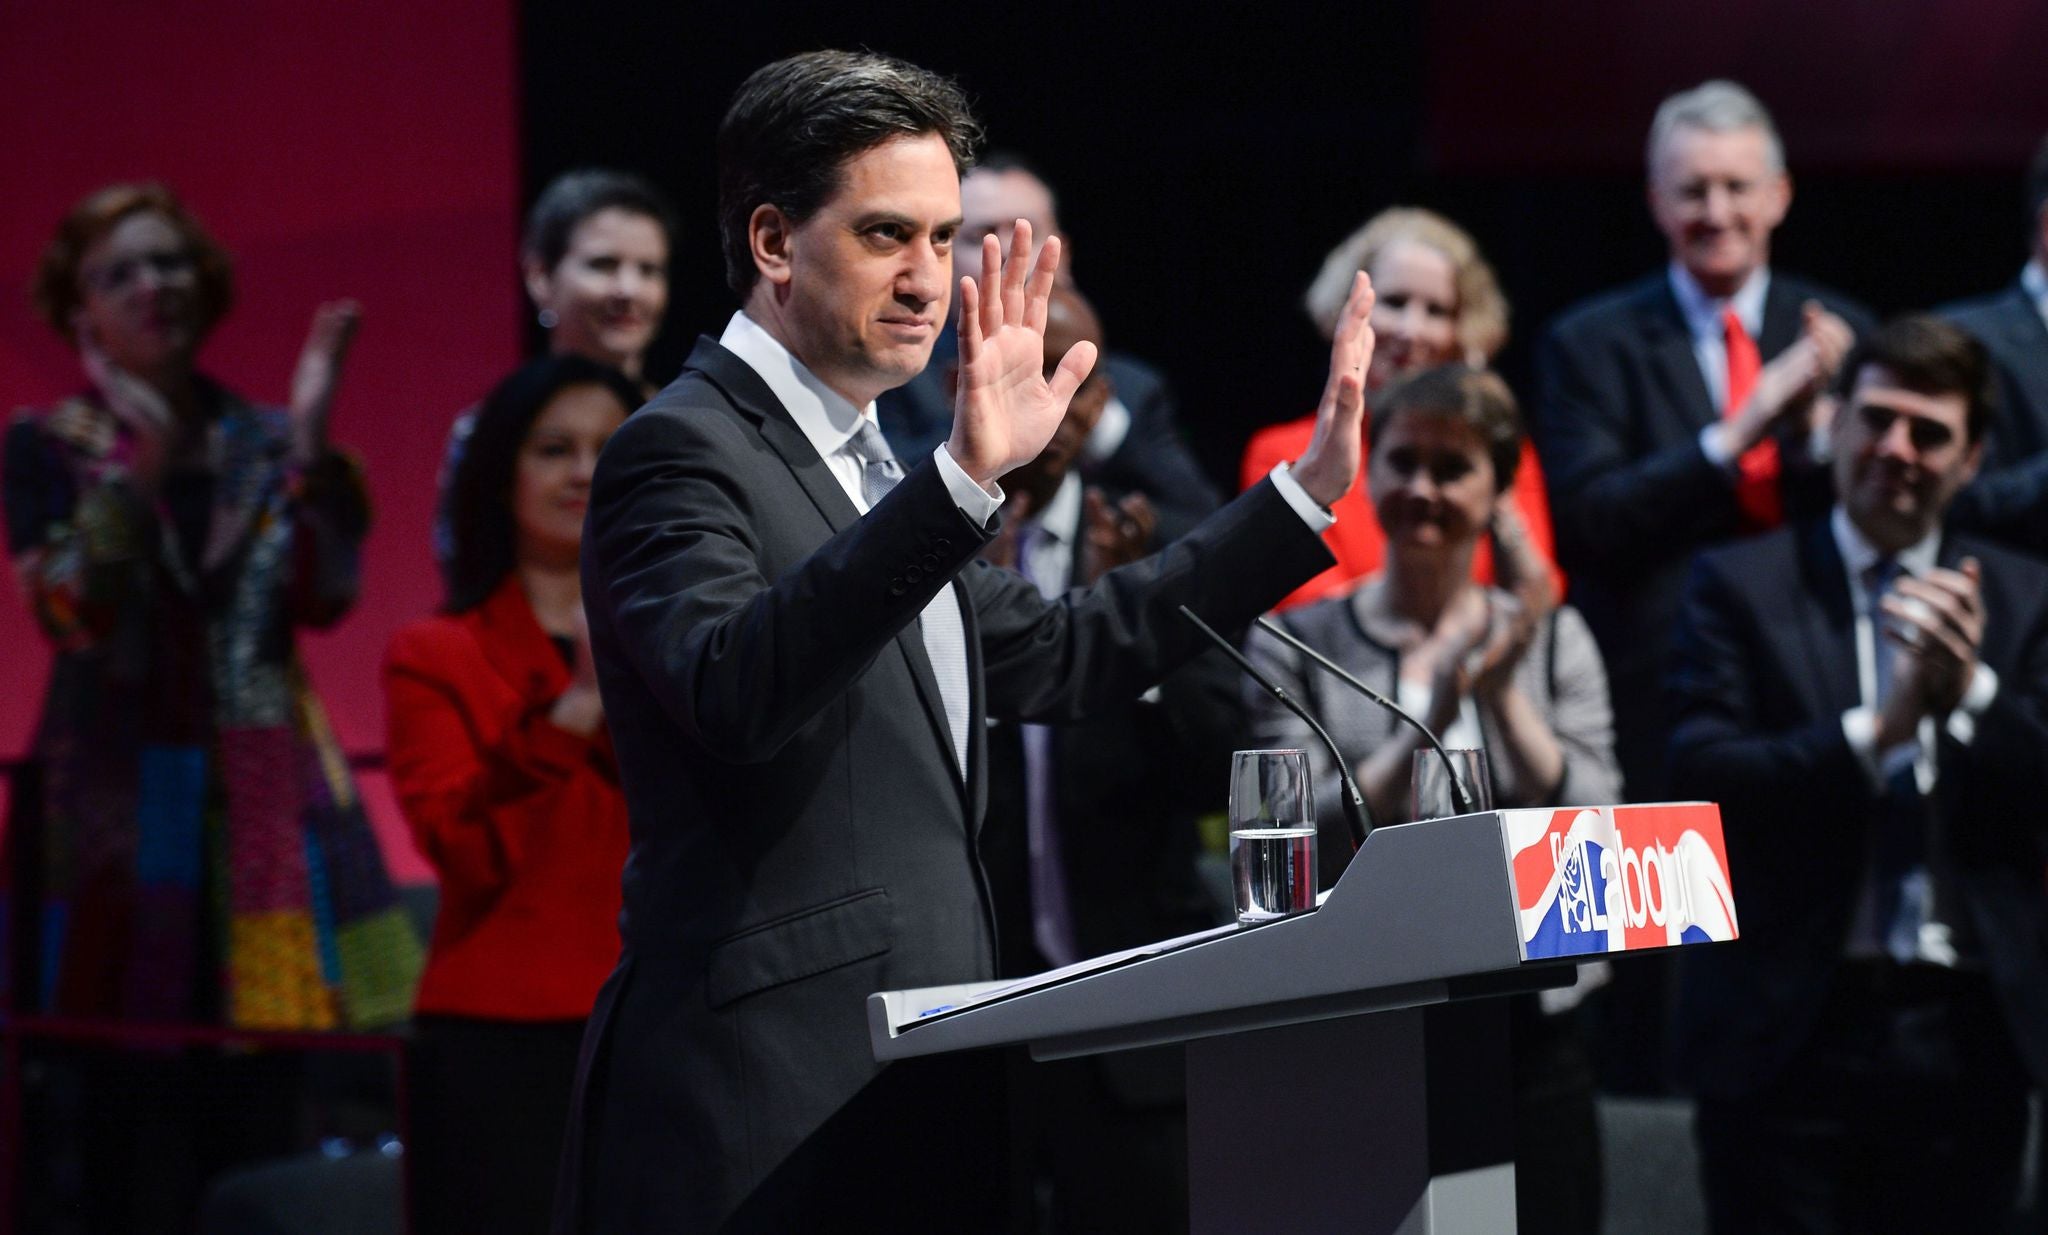 Ed Miliband unveiled his party's manifesto at the Coronation Street set in Manchester